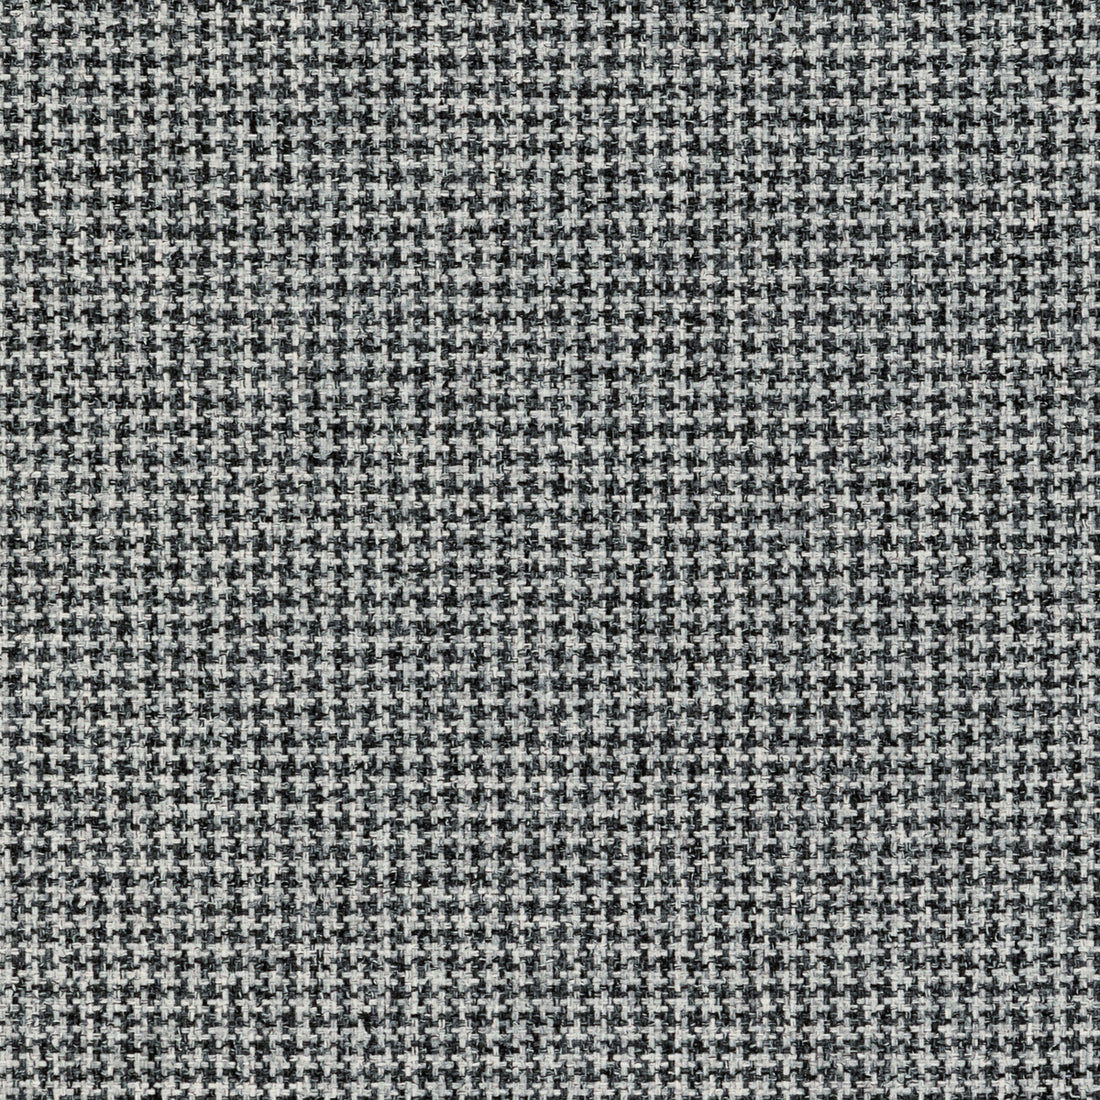 Steamboat fabric in storm color - pattern 36258.11.0 - by Kravet Contract in the Supreen collection